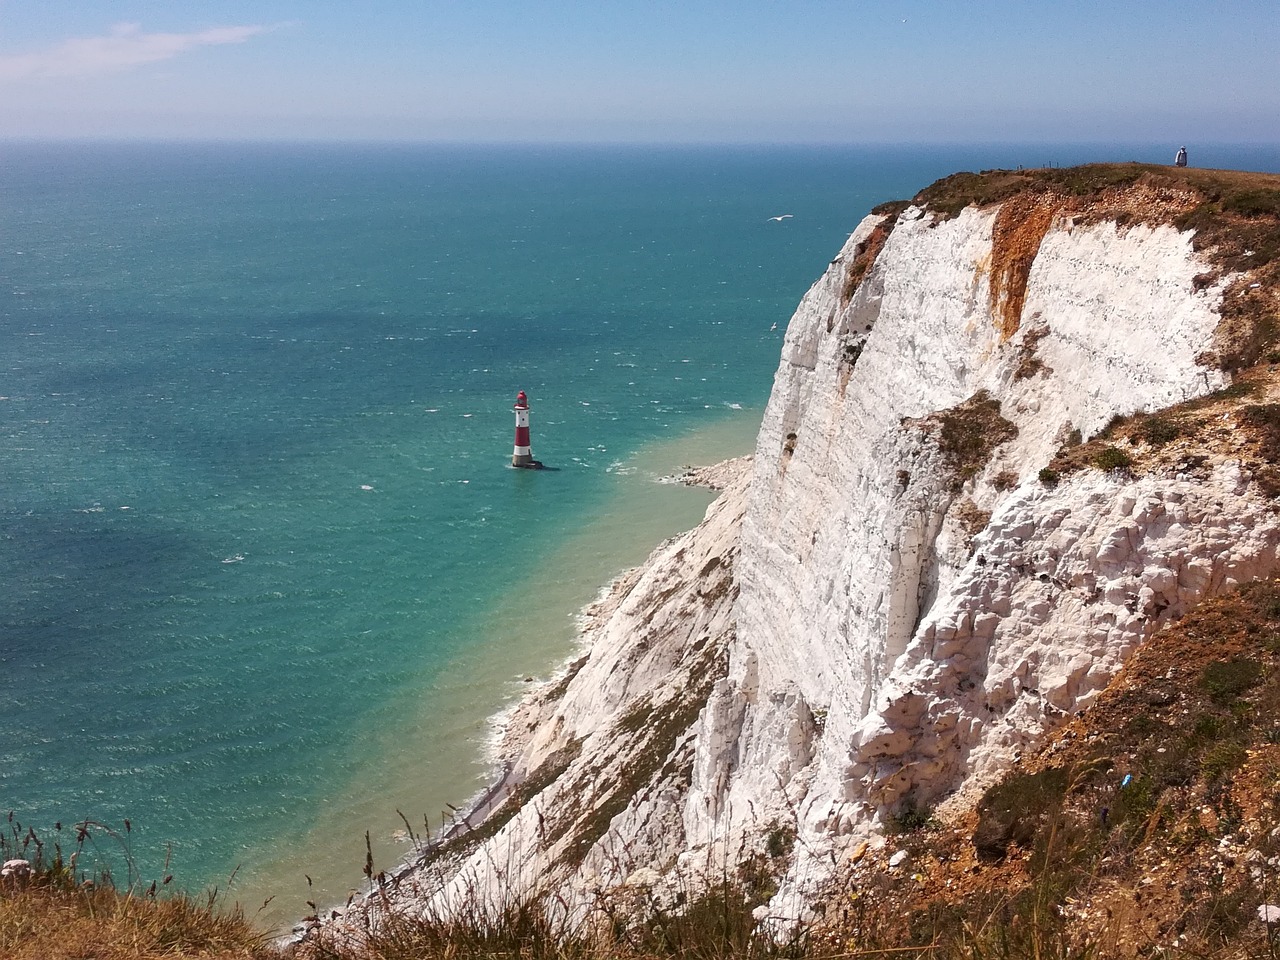 The white cliffs of the Seven sisters overlooking the emerald ocean